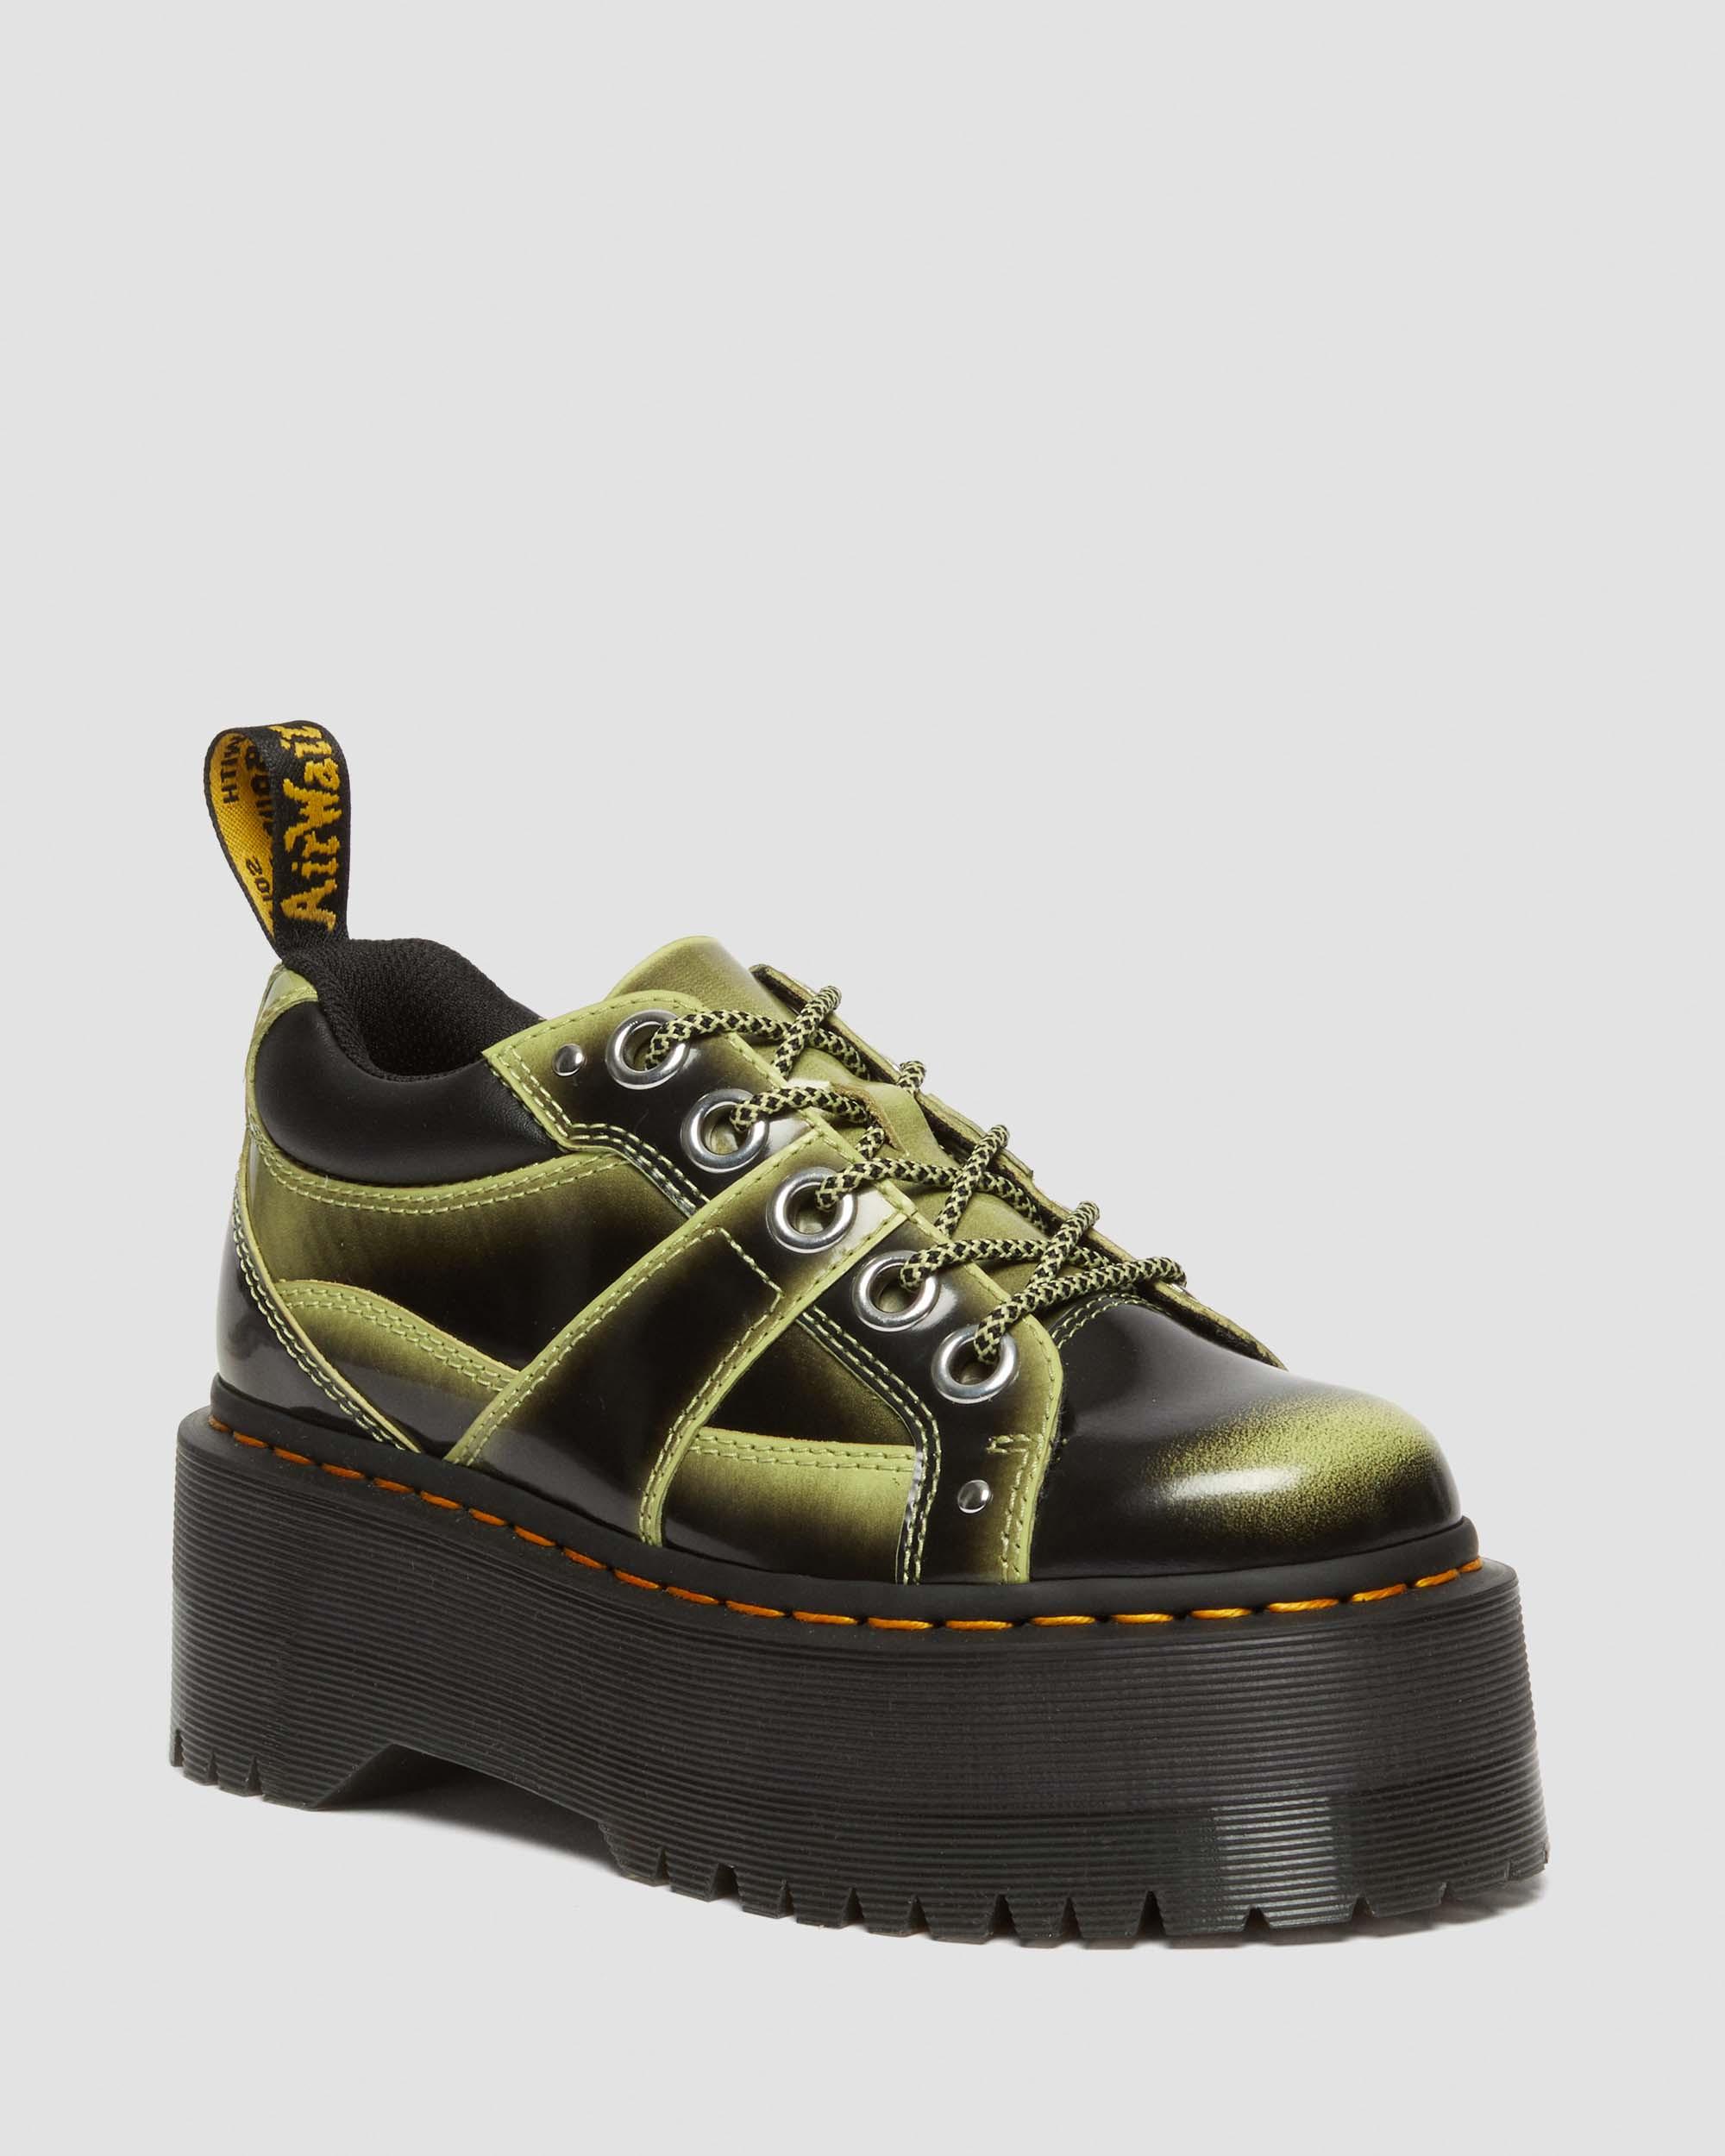 5-Eye Max Distressed Leather Platform Shoes in Lime Green | Dr. Martens